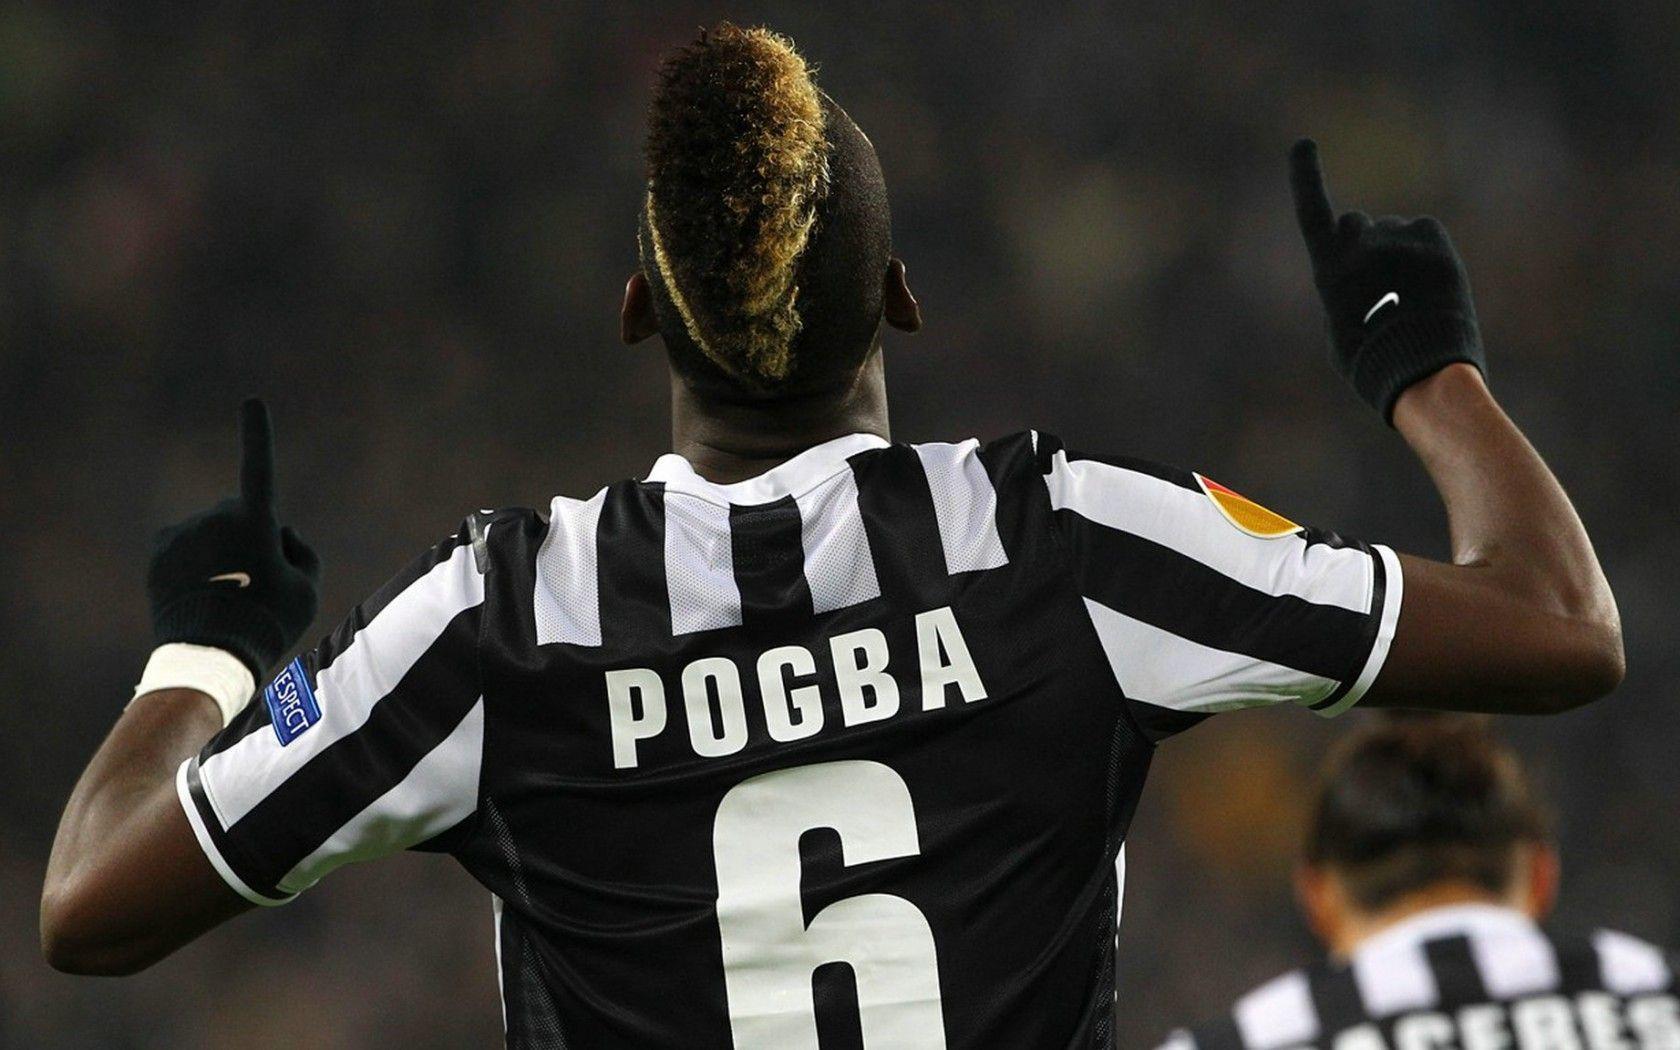 Paul Pogba Wallpaper Wallpaper Background of Your Choice